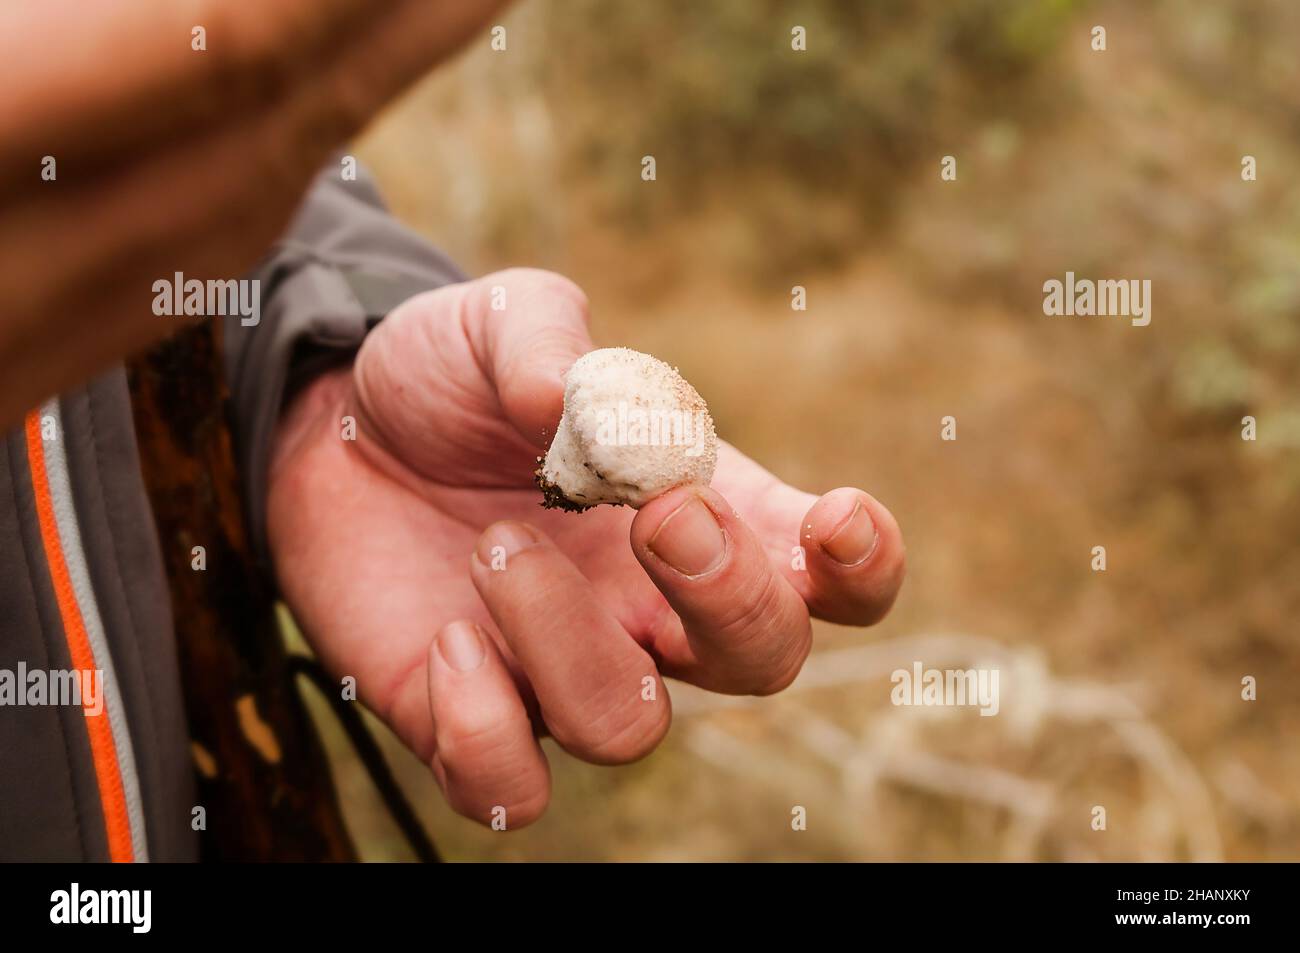 Small white granulated and spore mushroom in the hand of a man collected in the bush in autumn. Variety Lycoperdon perlatum Pers. Puffball. Stock Photo